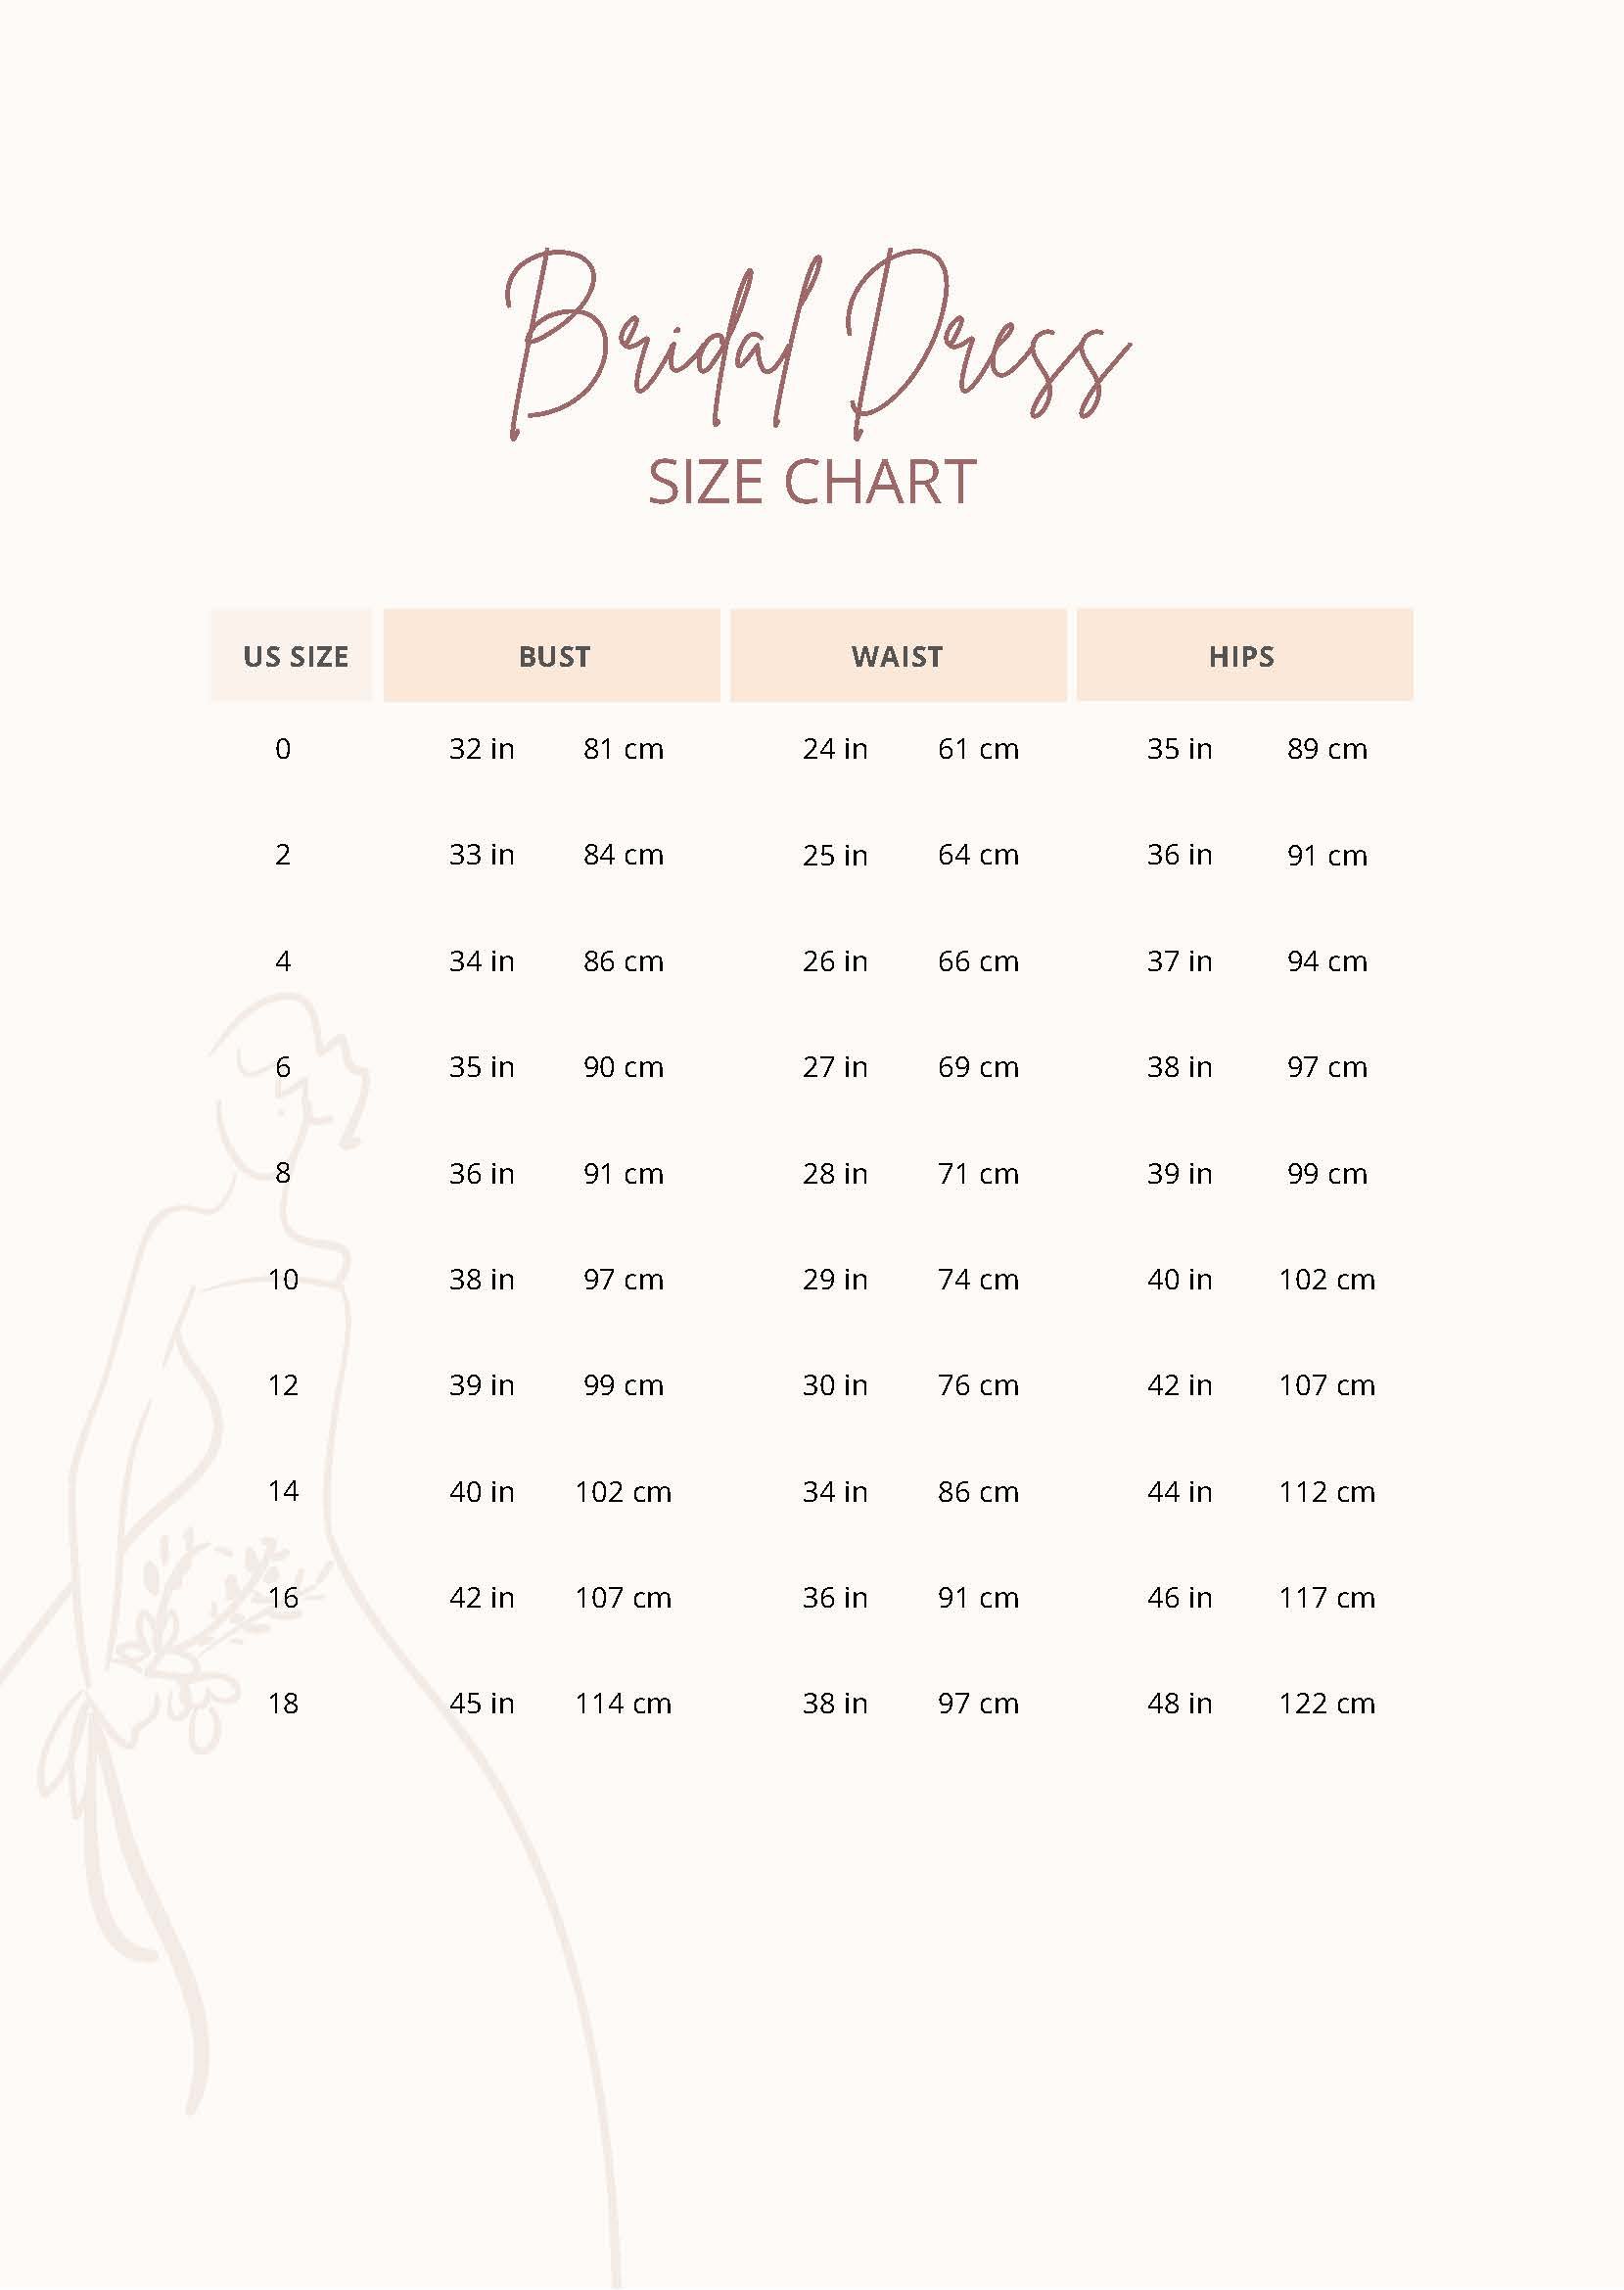 FREE Dress Size Chart Template - Download in Word, Google Docs, PDF ...